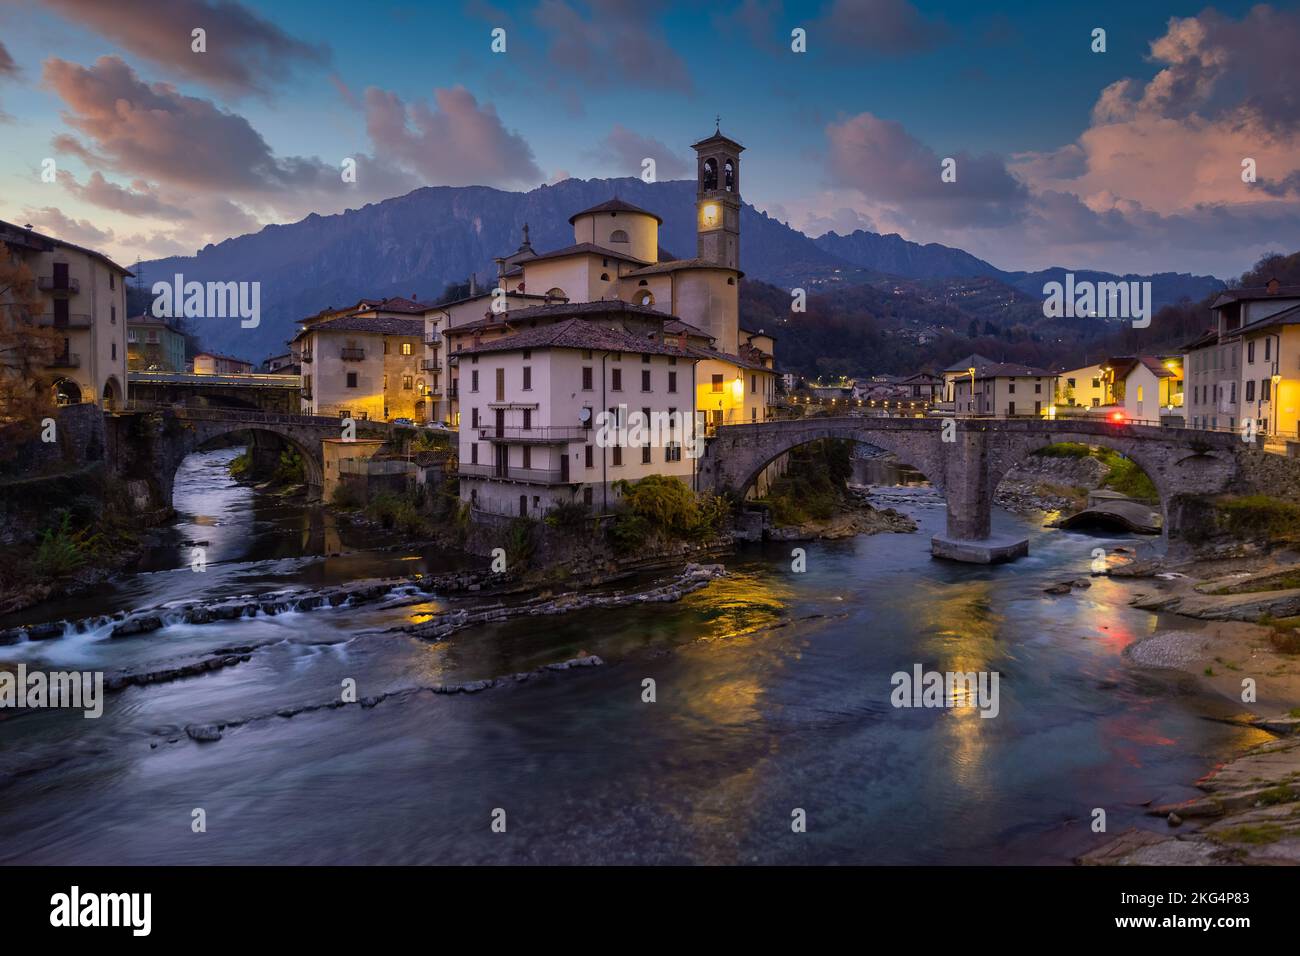 Aerial villagescape - old church and crossing rivers with mountains backdrop, San Giovanni Bianco Village, Valbrembana, Bergamo, Lombardy, Italy Stock Photo